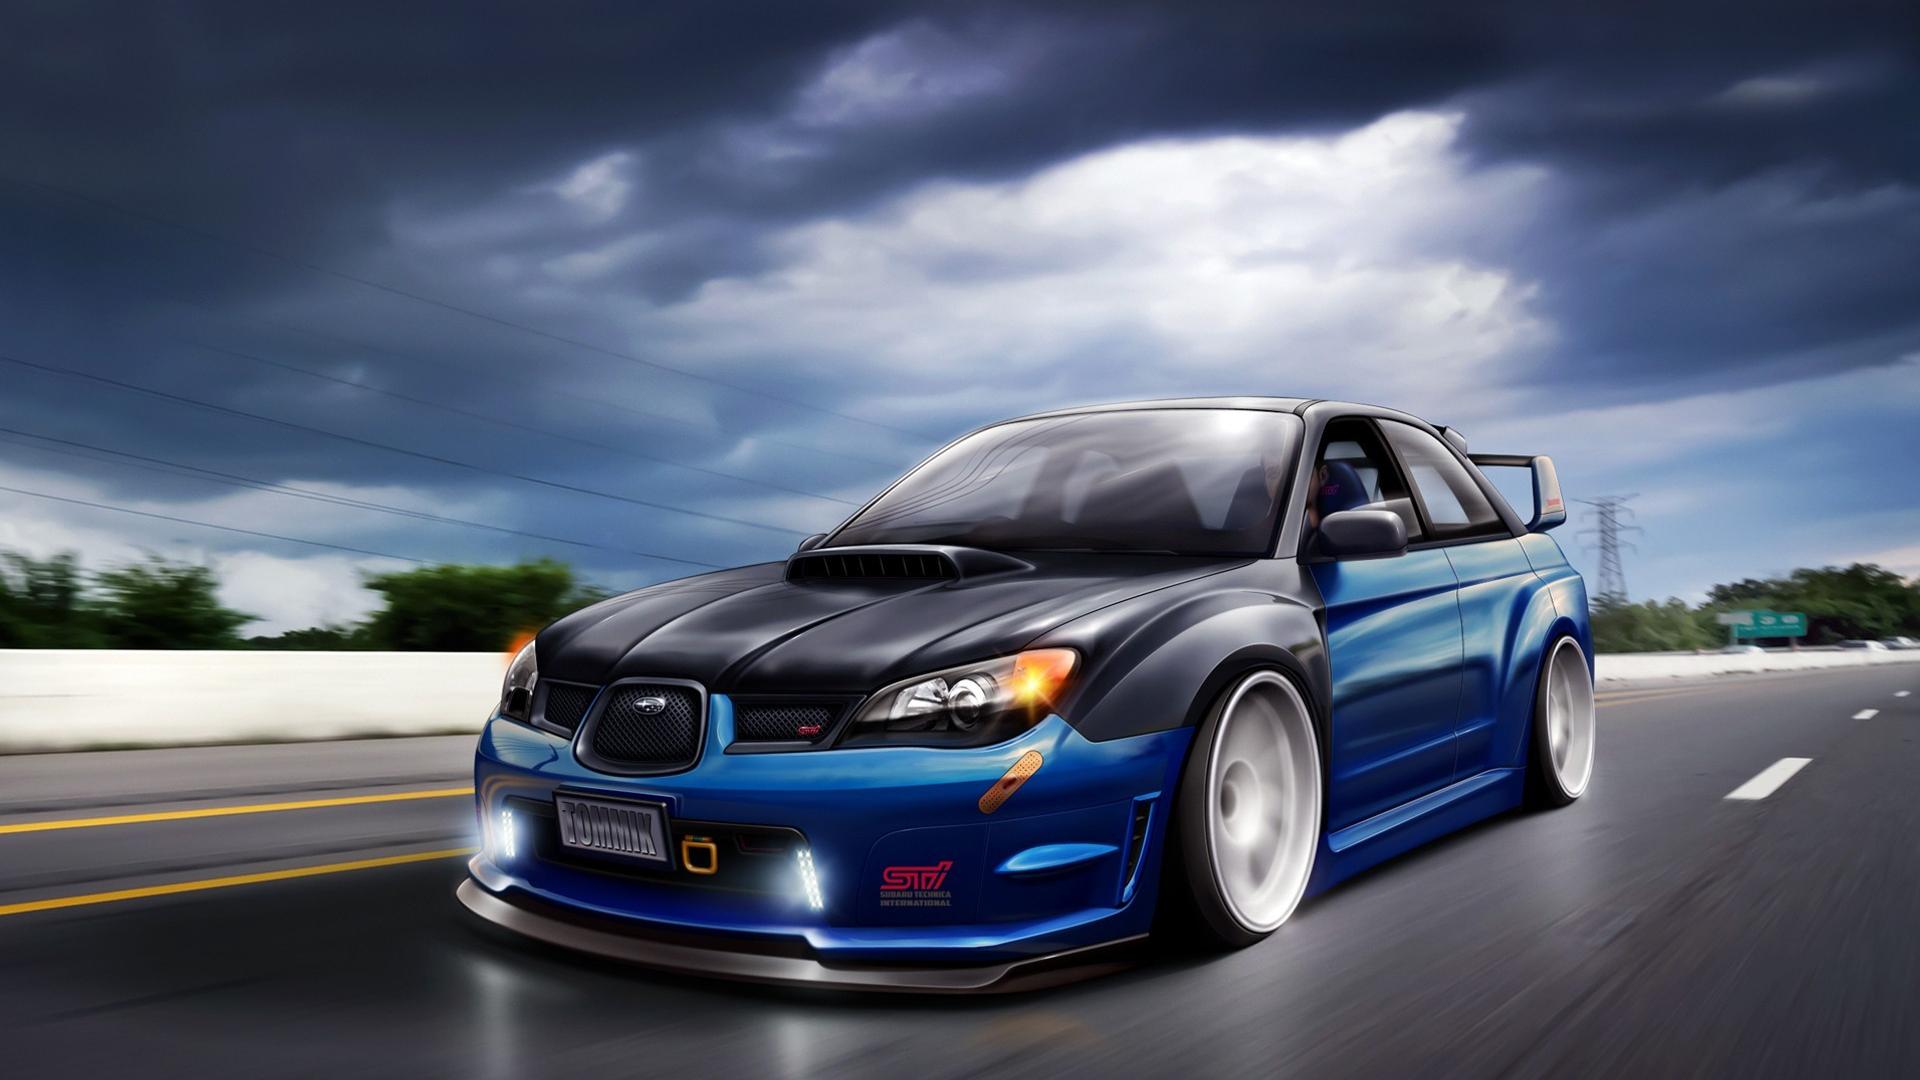 Japanese Cars Wallpapers - Wallpaper Cave